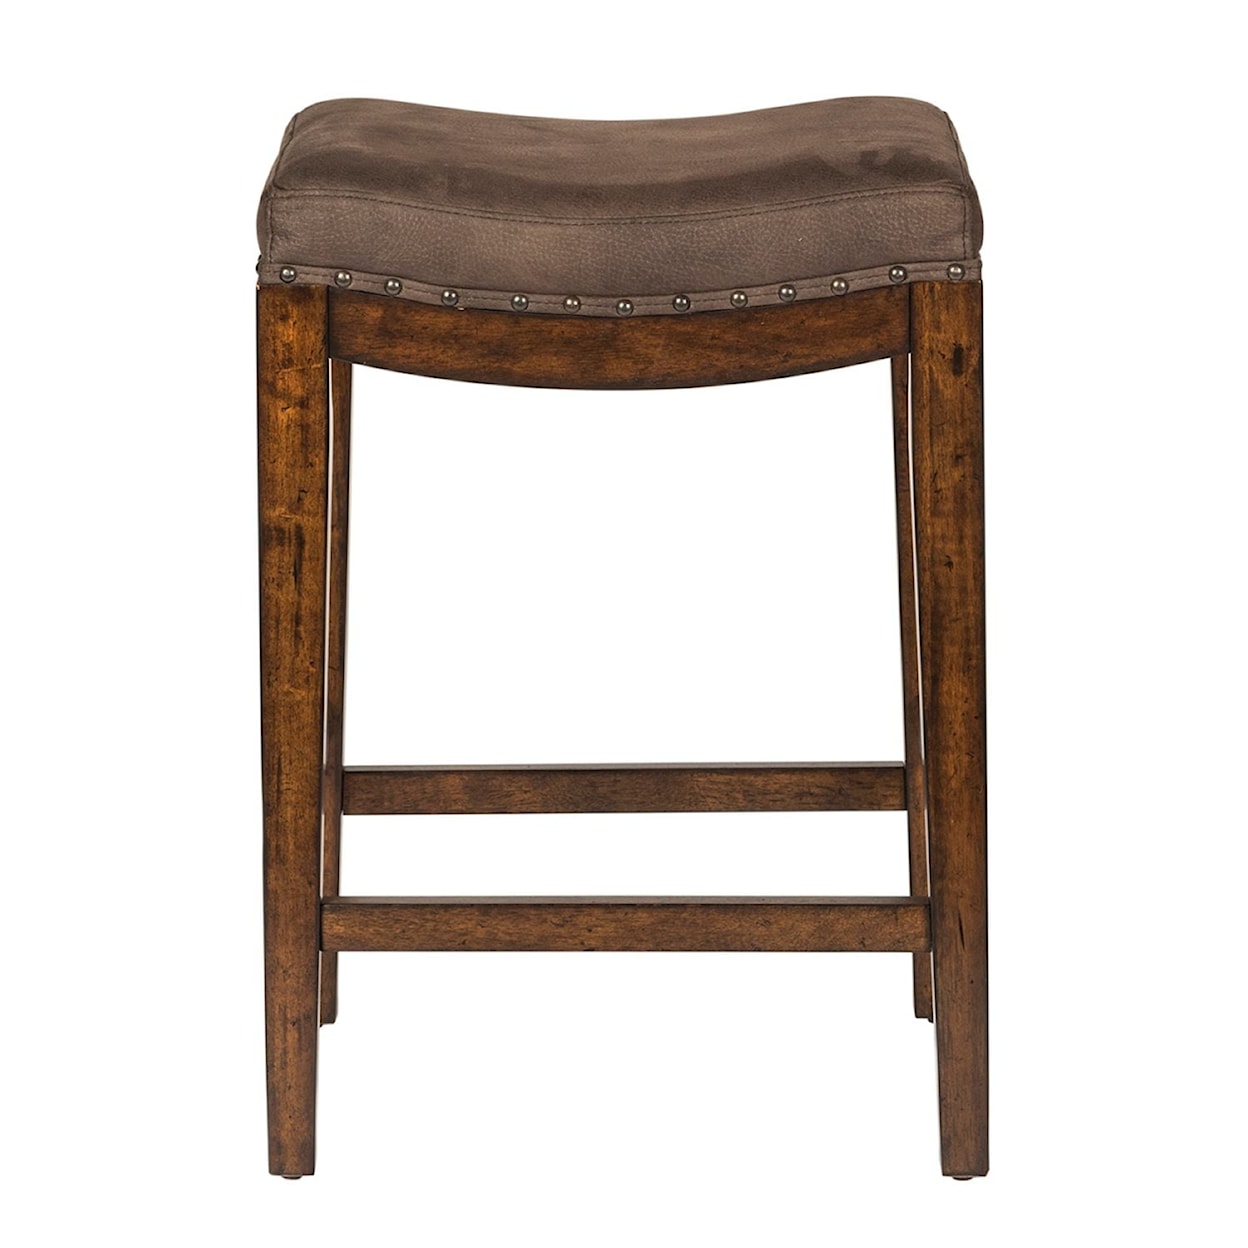 Libby Aspen Skies Upholstered Console Stool